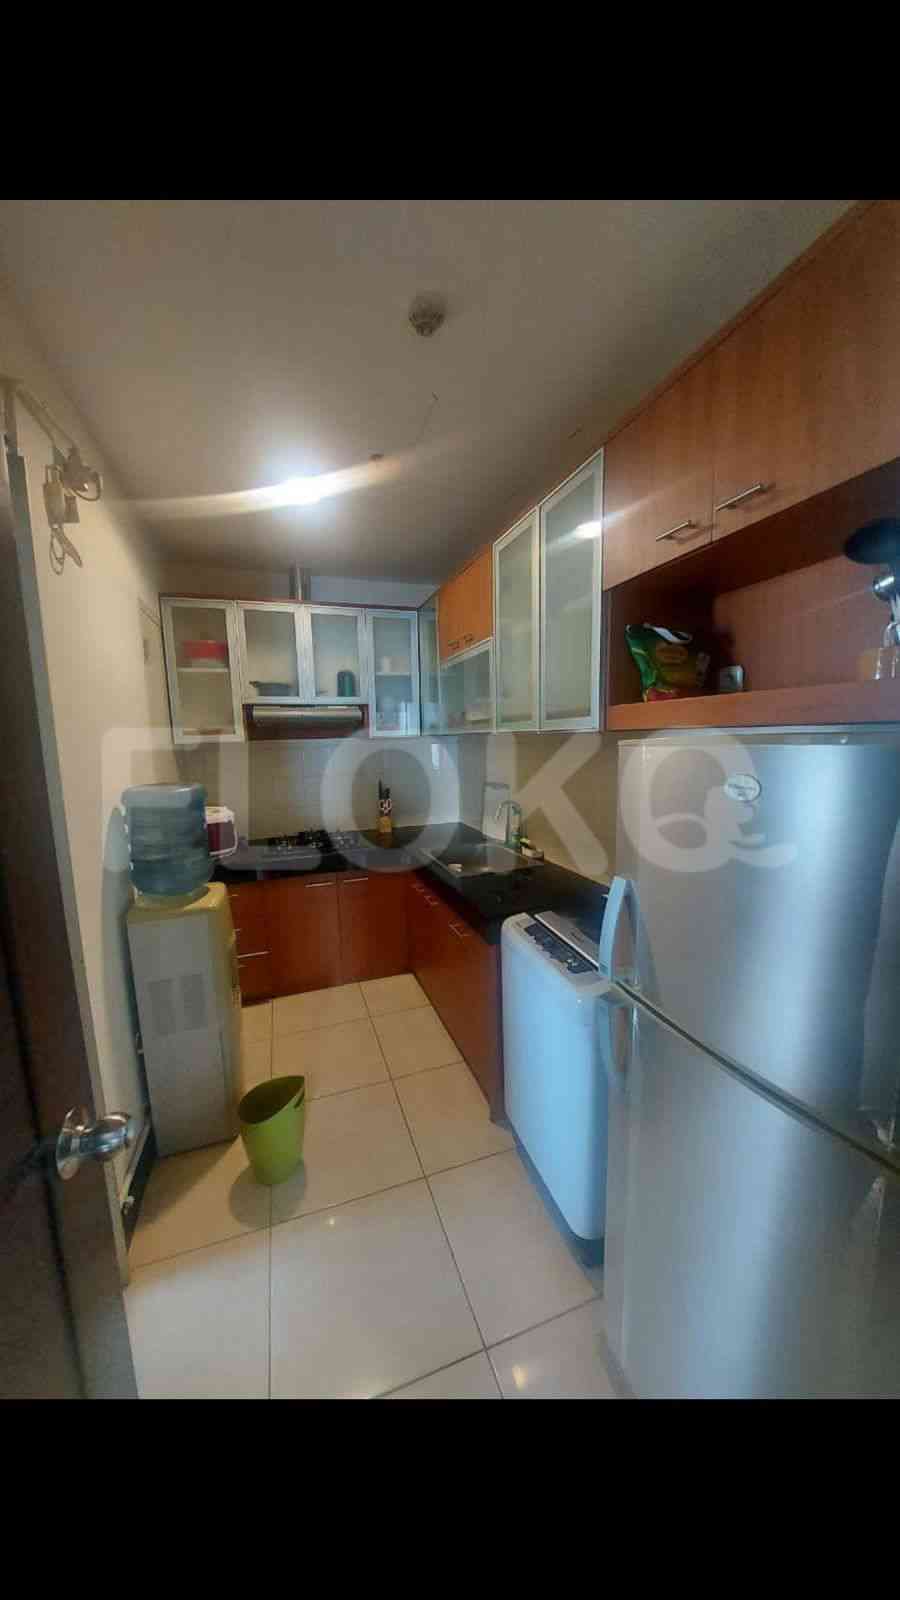 2 Bedroom on 23rd Floor for Rent in Essence Darmawangsa Apartment - fci951 1